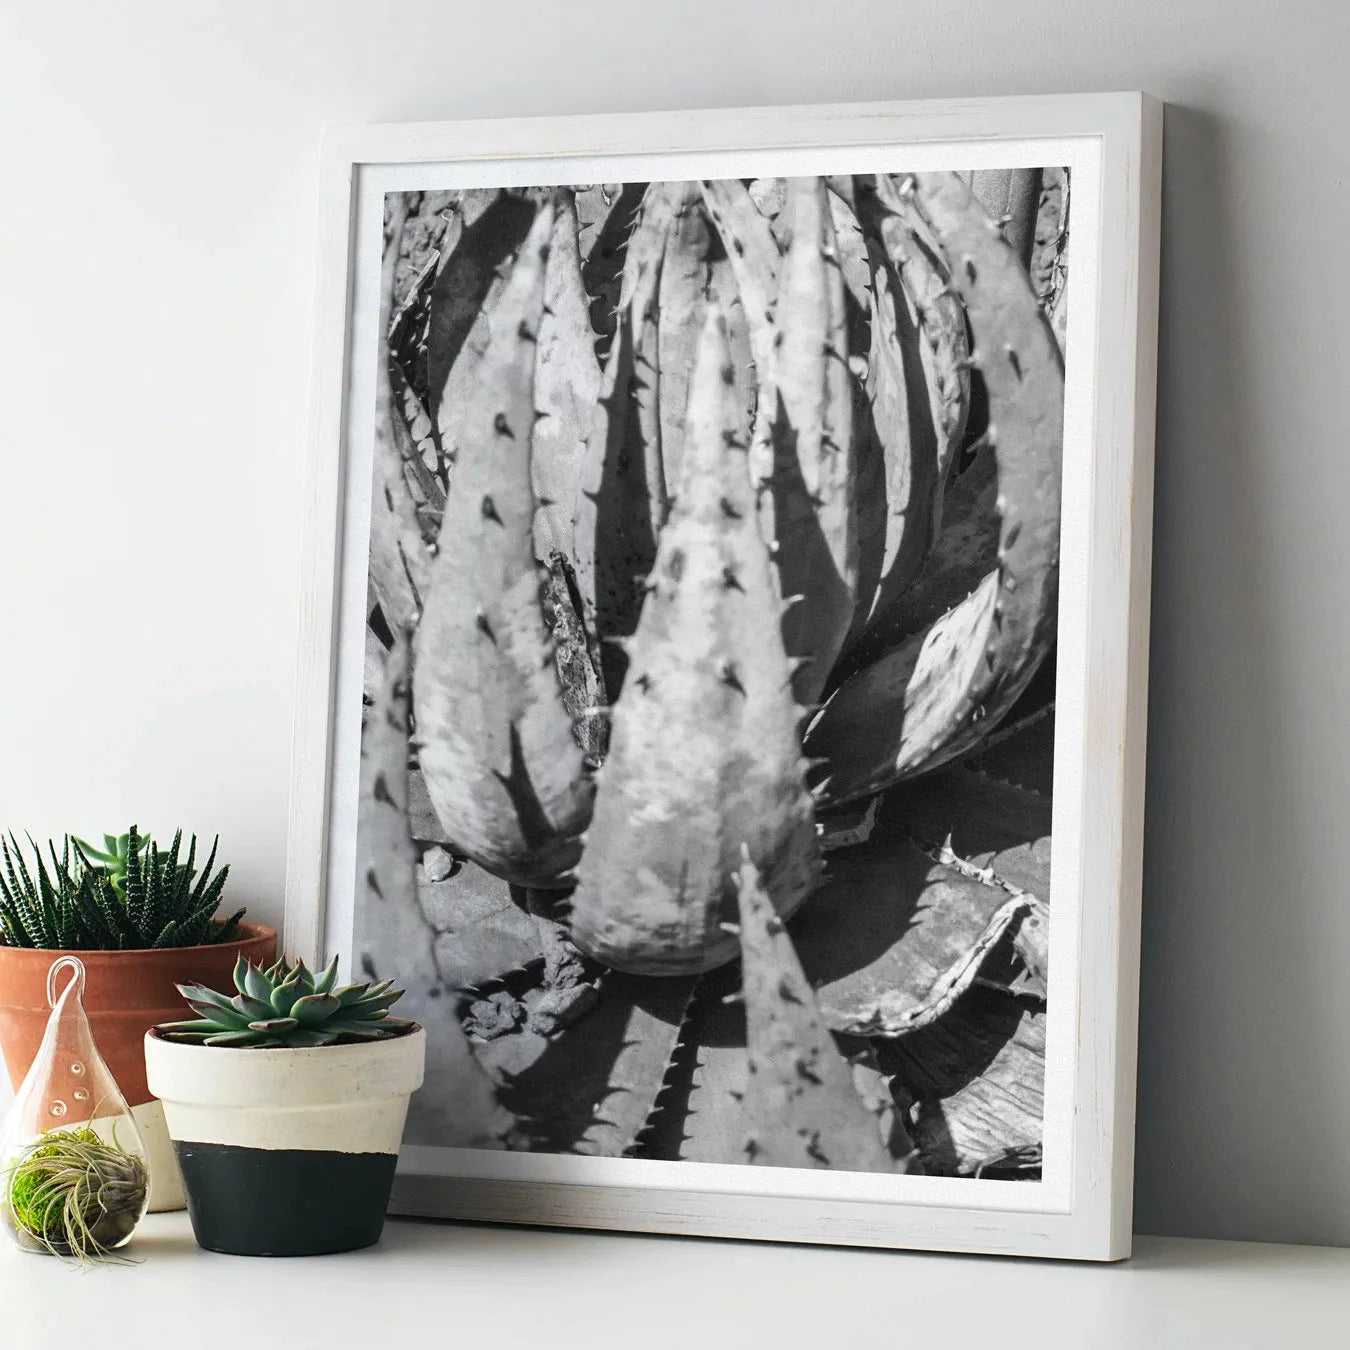 Layer Cake - Succulent black And White Wall Art - 8×10 - Posters Prints & Visual Artwork - Aesthetic Art